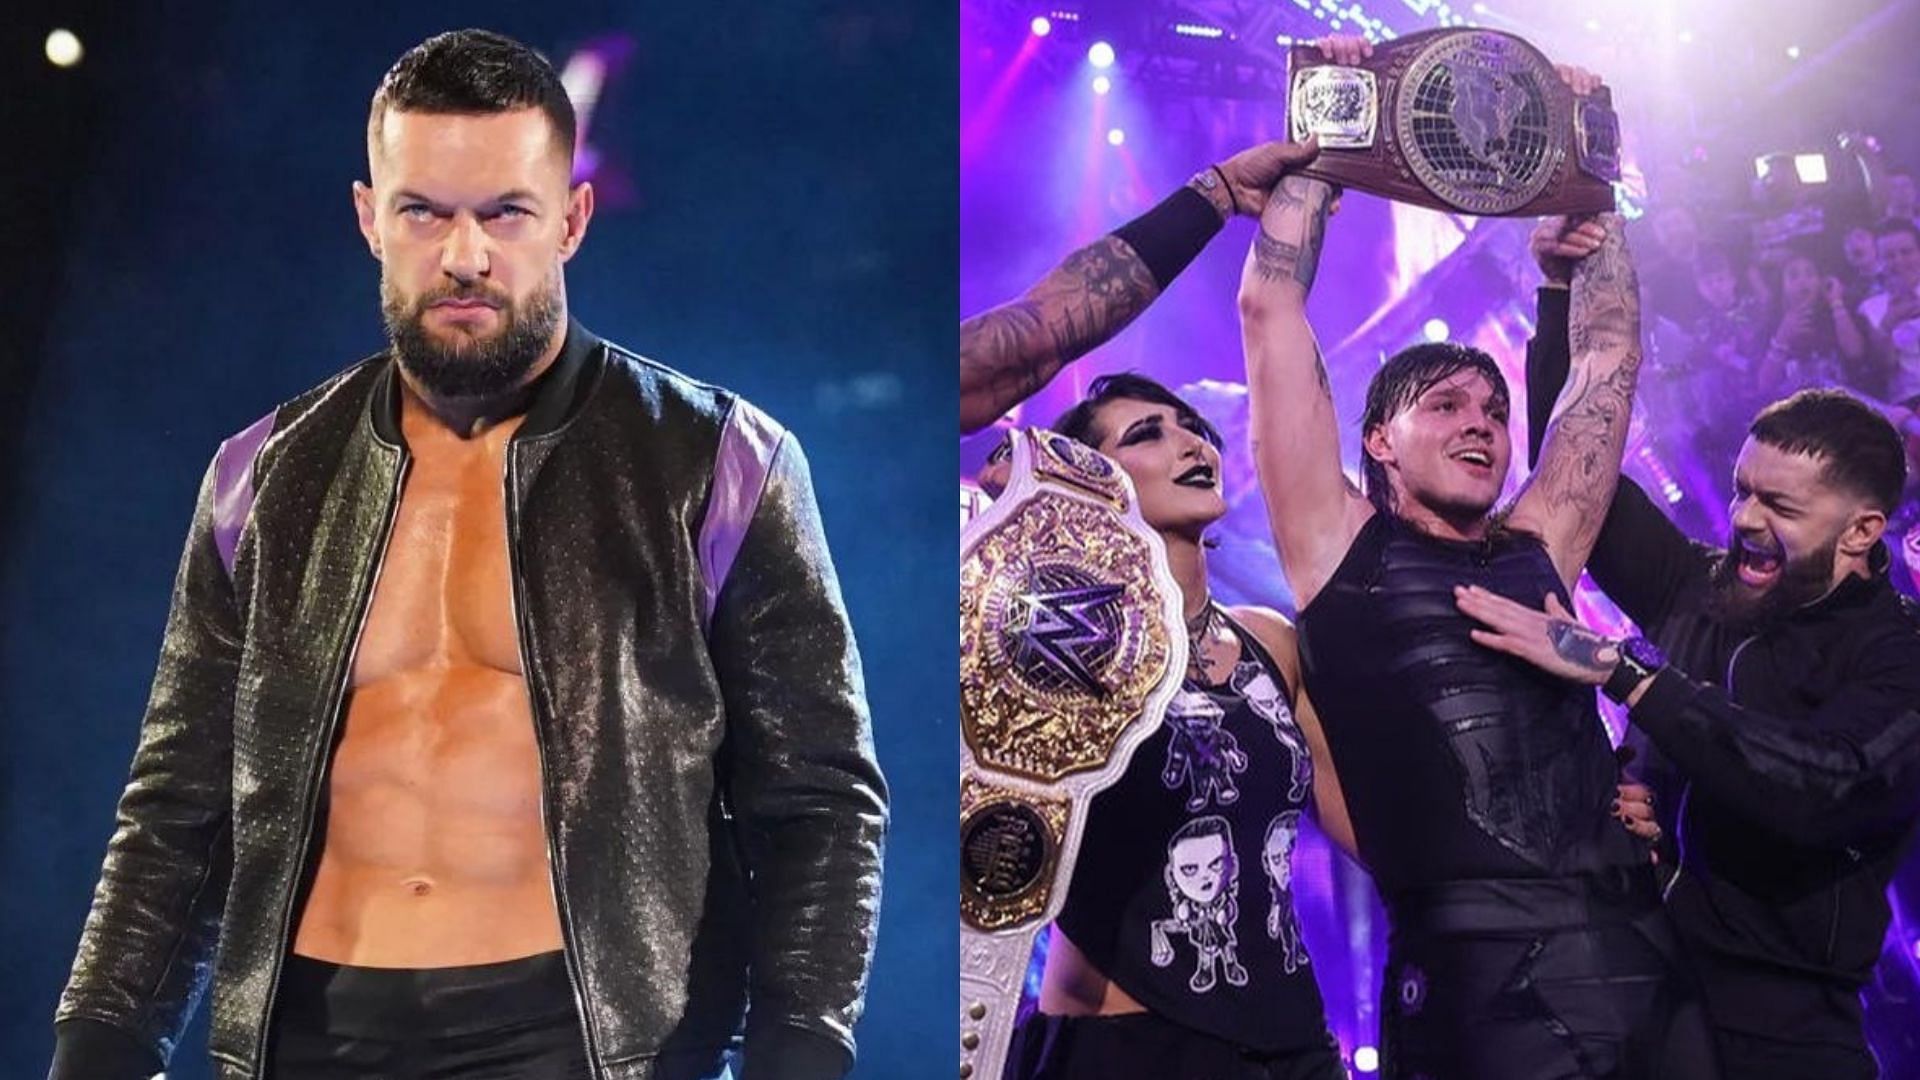 Finn Balor and The Judgment Day have been dominating WWE